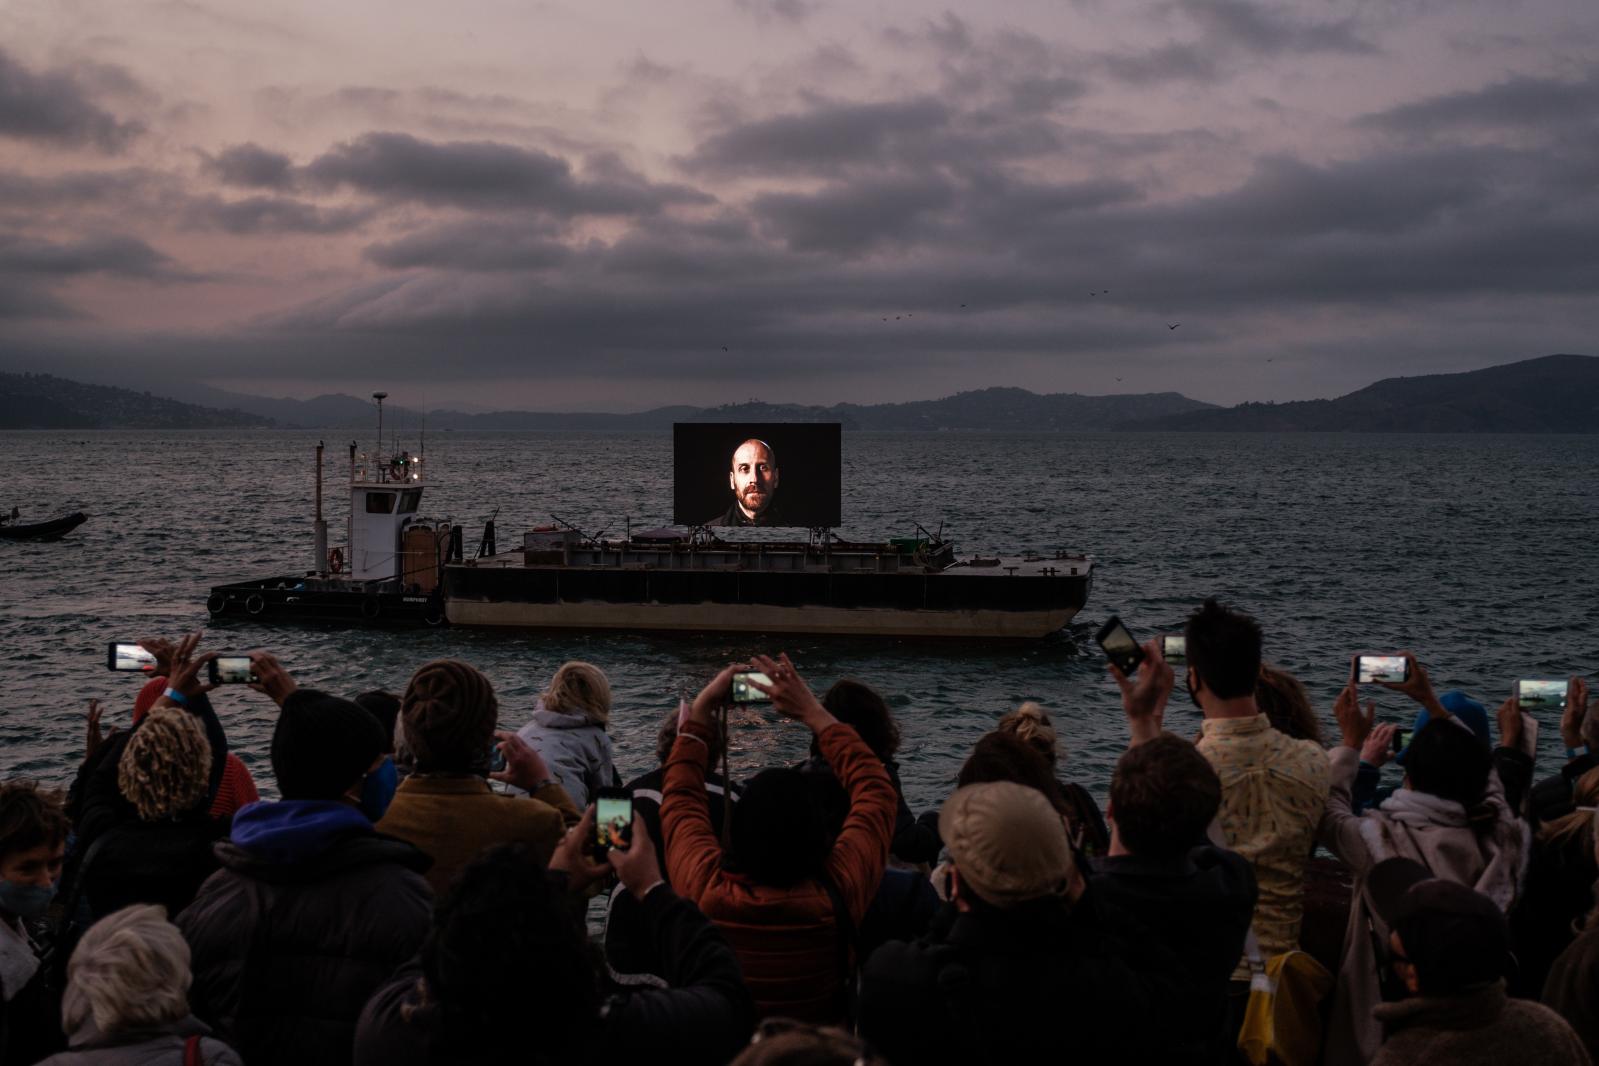 People gather at Fort Mason to view &ldquo;Night Watch&rdquo; a floating media installation created by Shimon Attie that displays portraits of refugees granted asylum in the U.S, in San Francisco on Friday, September 17, 2021.